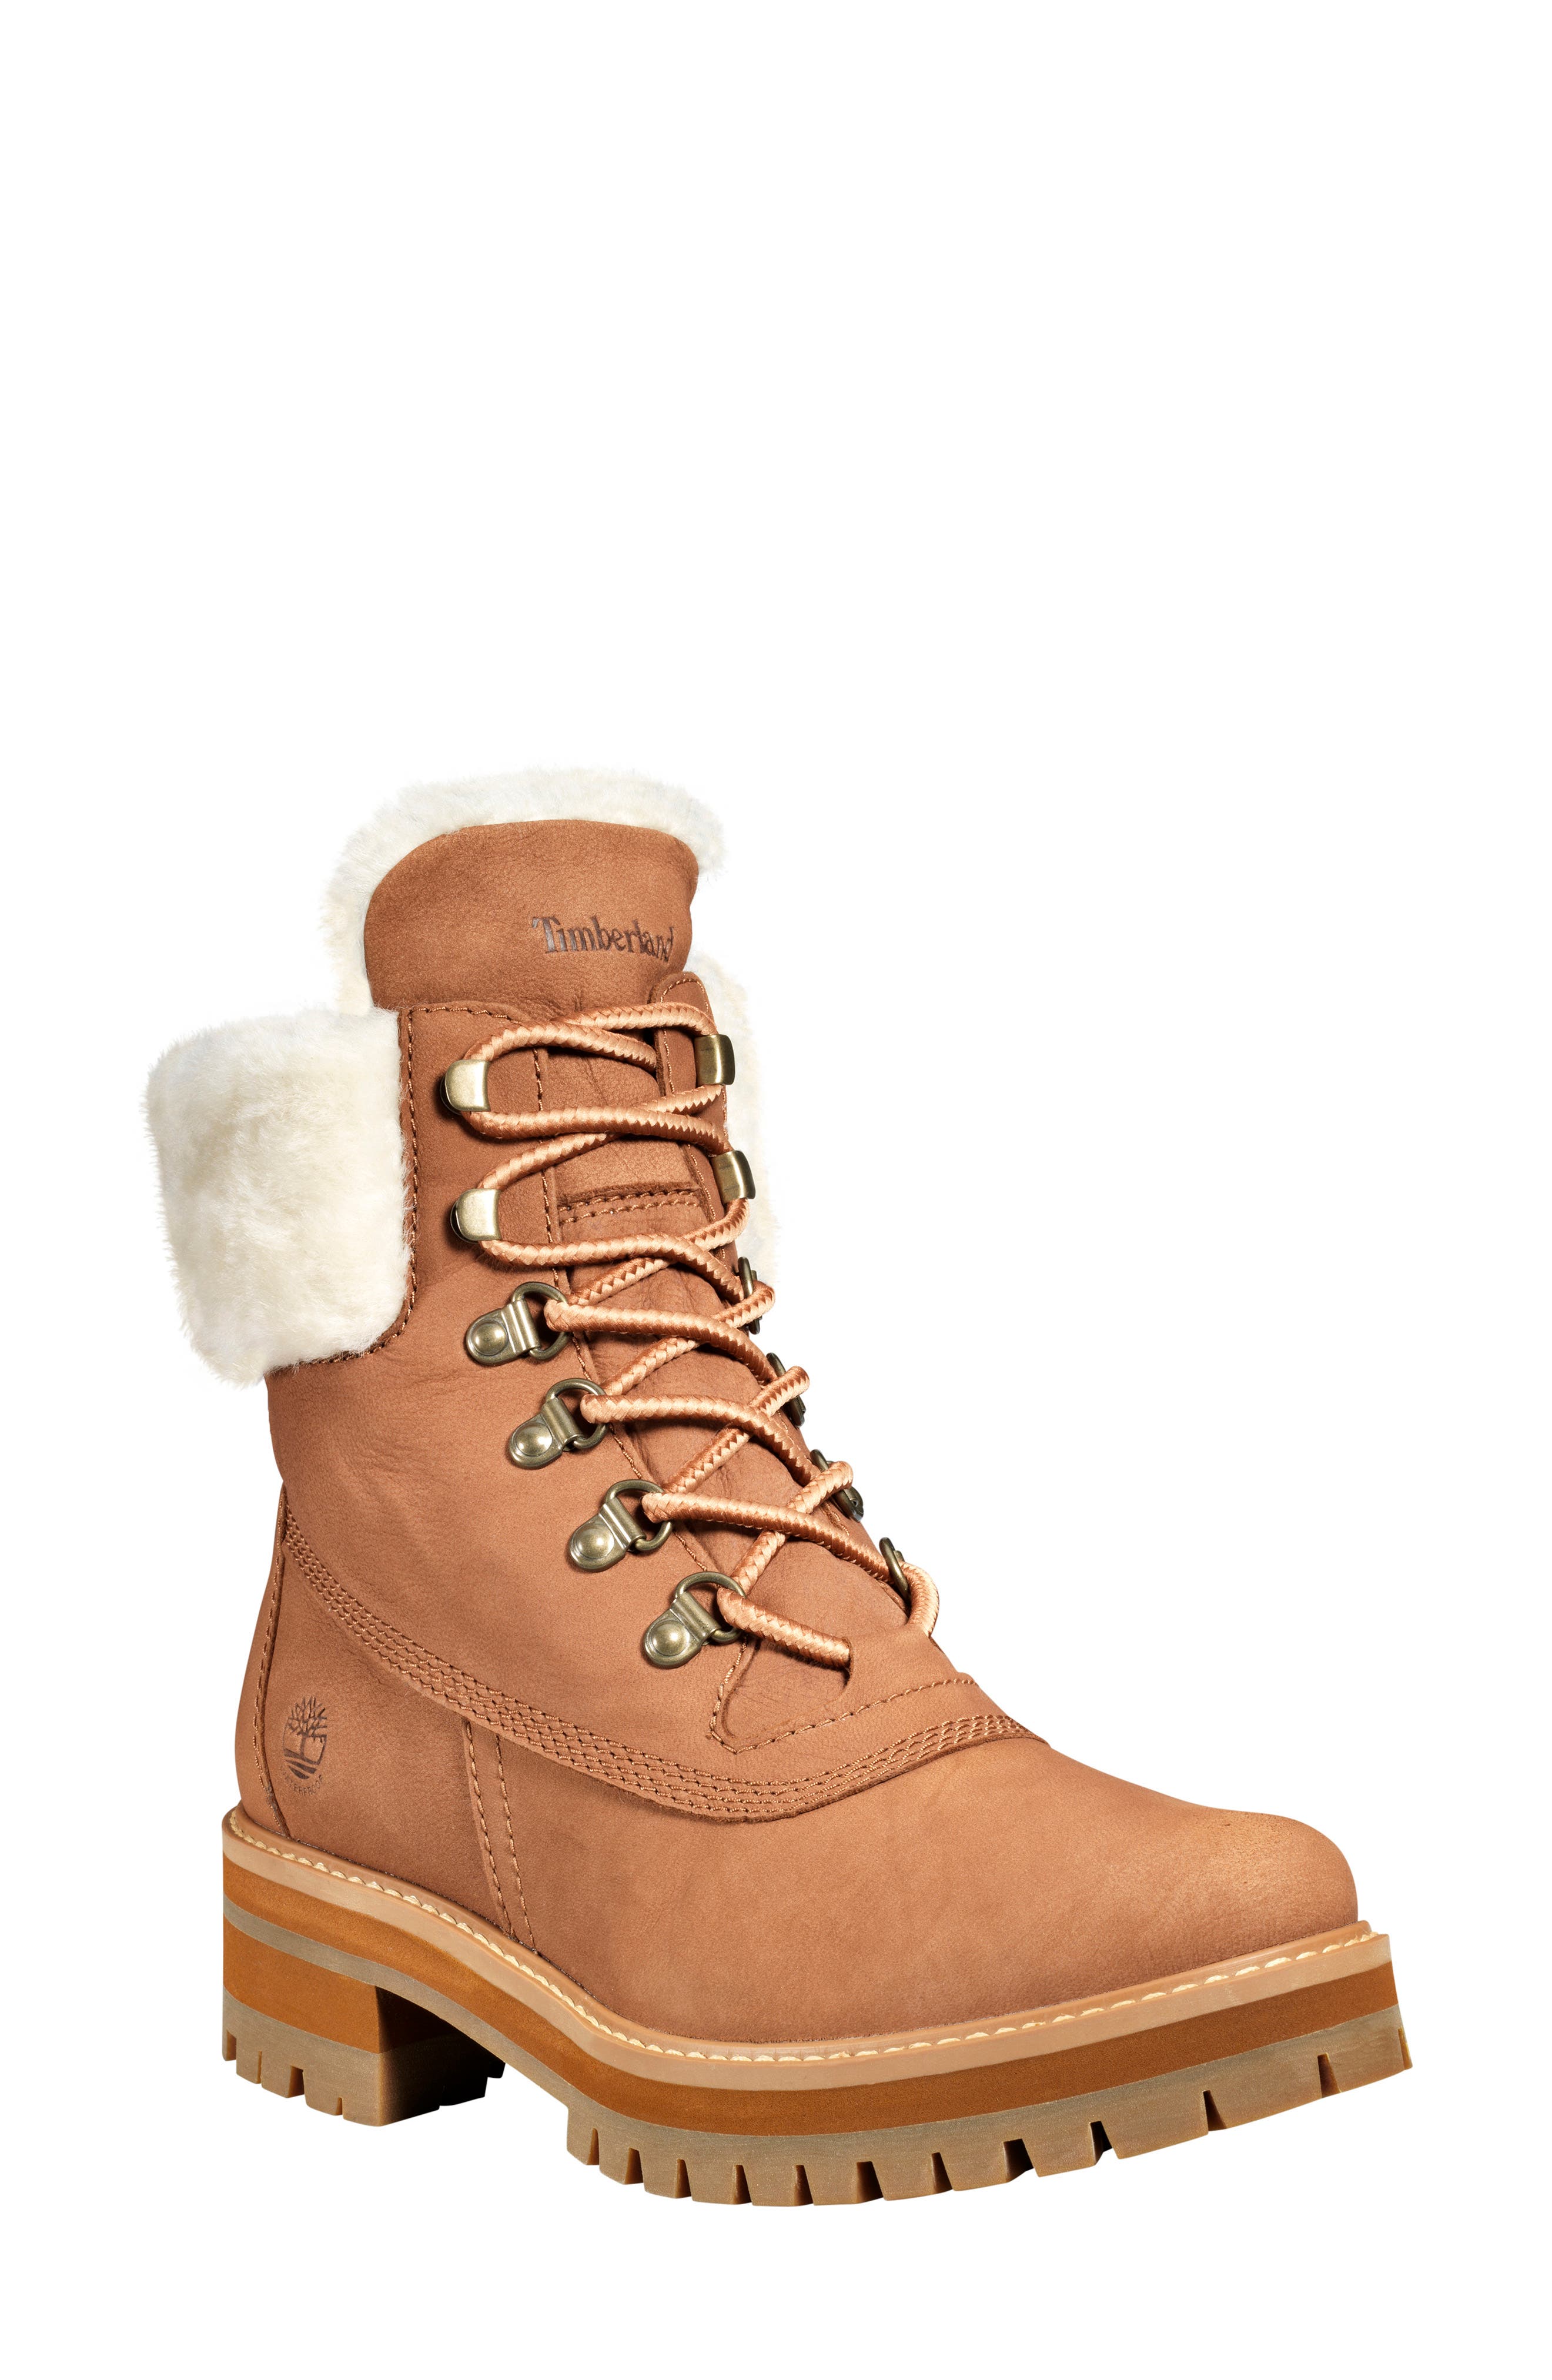 new timberland boots 217